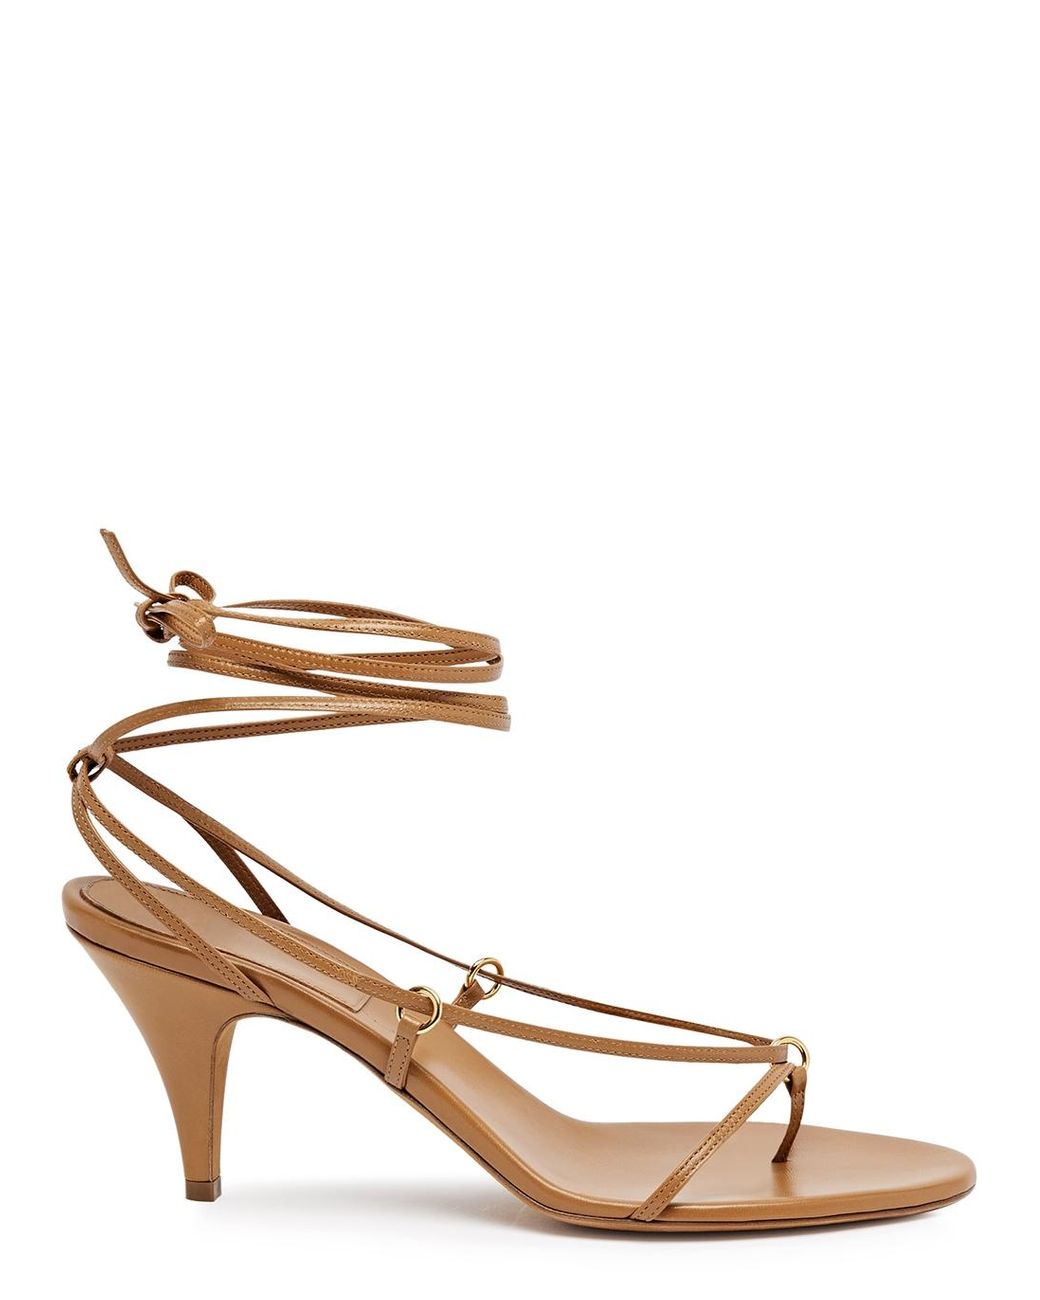 Khaite Marion 75 Lace-up Leather Sandals in Natural | Lyst